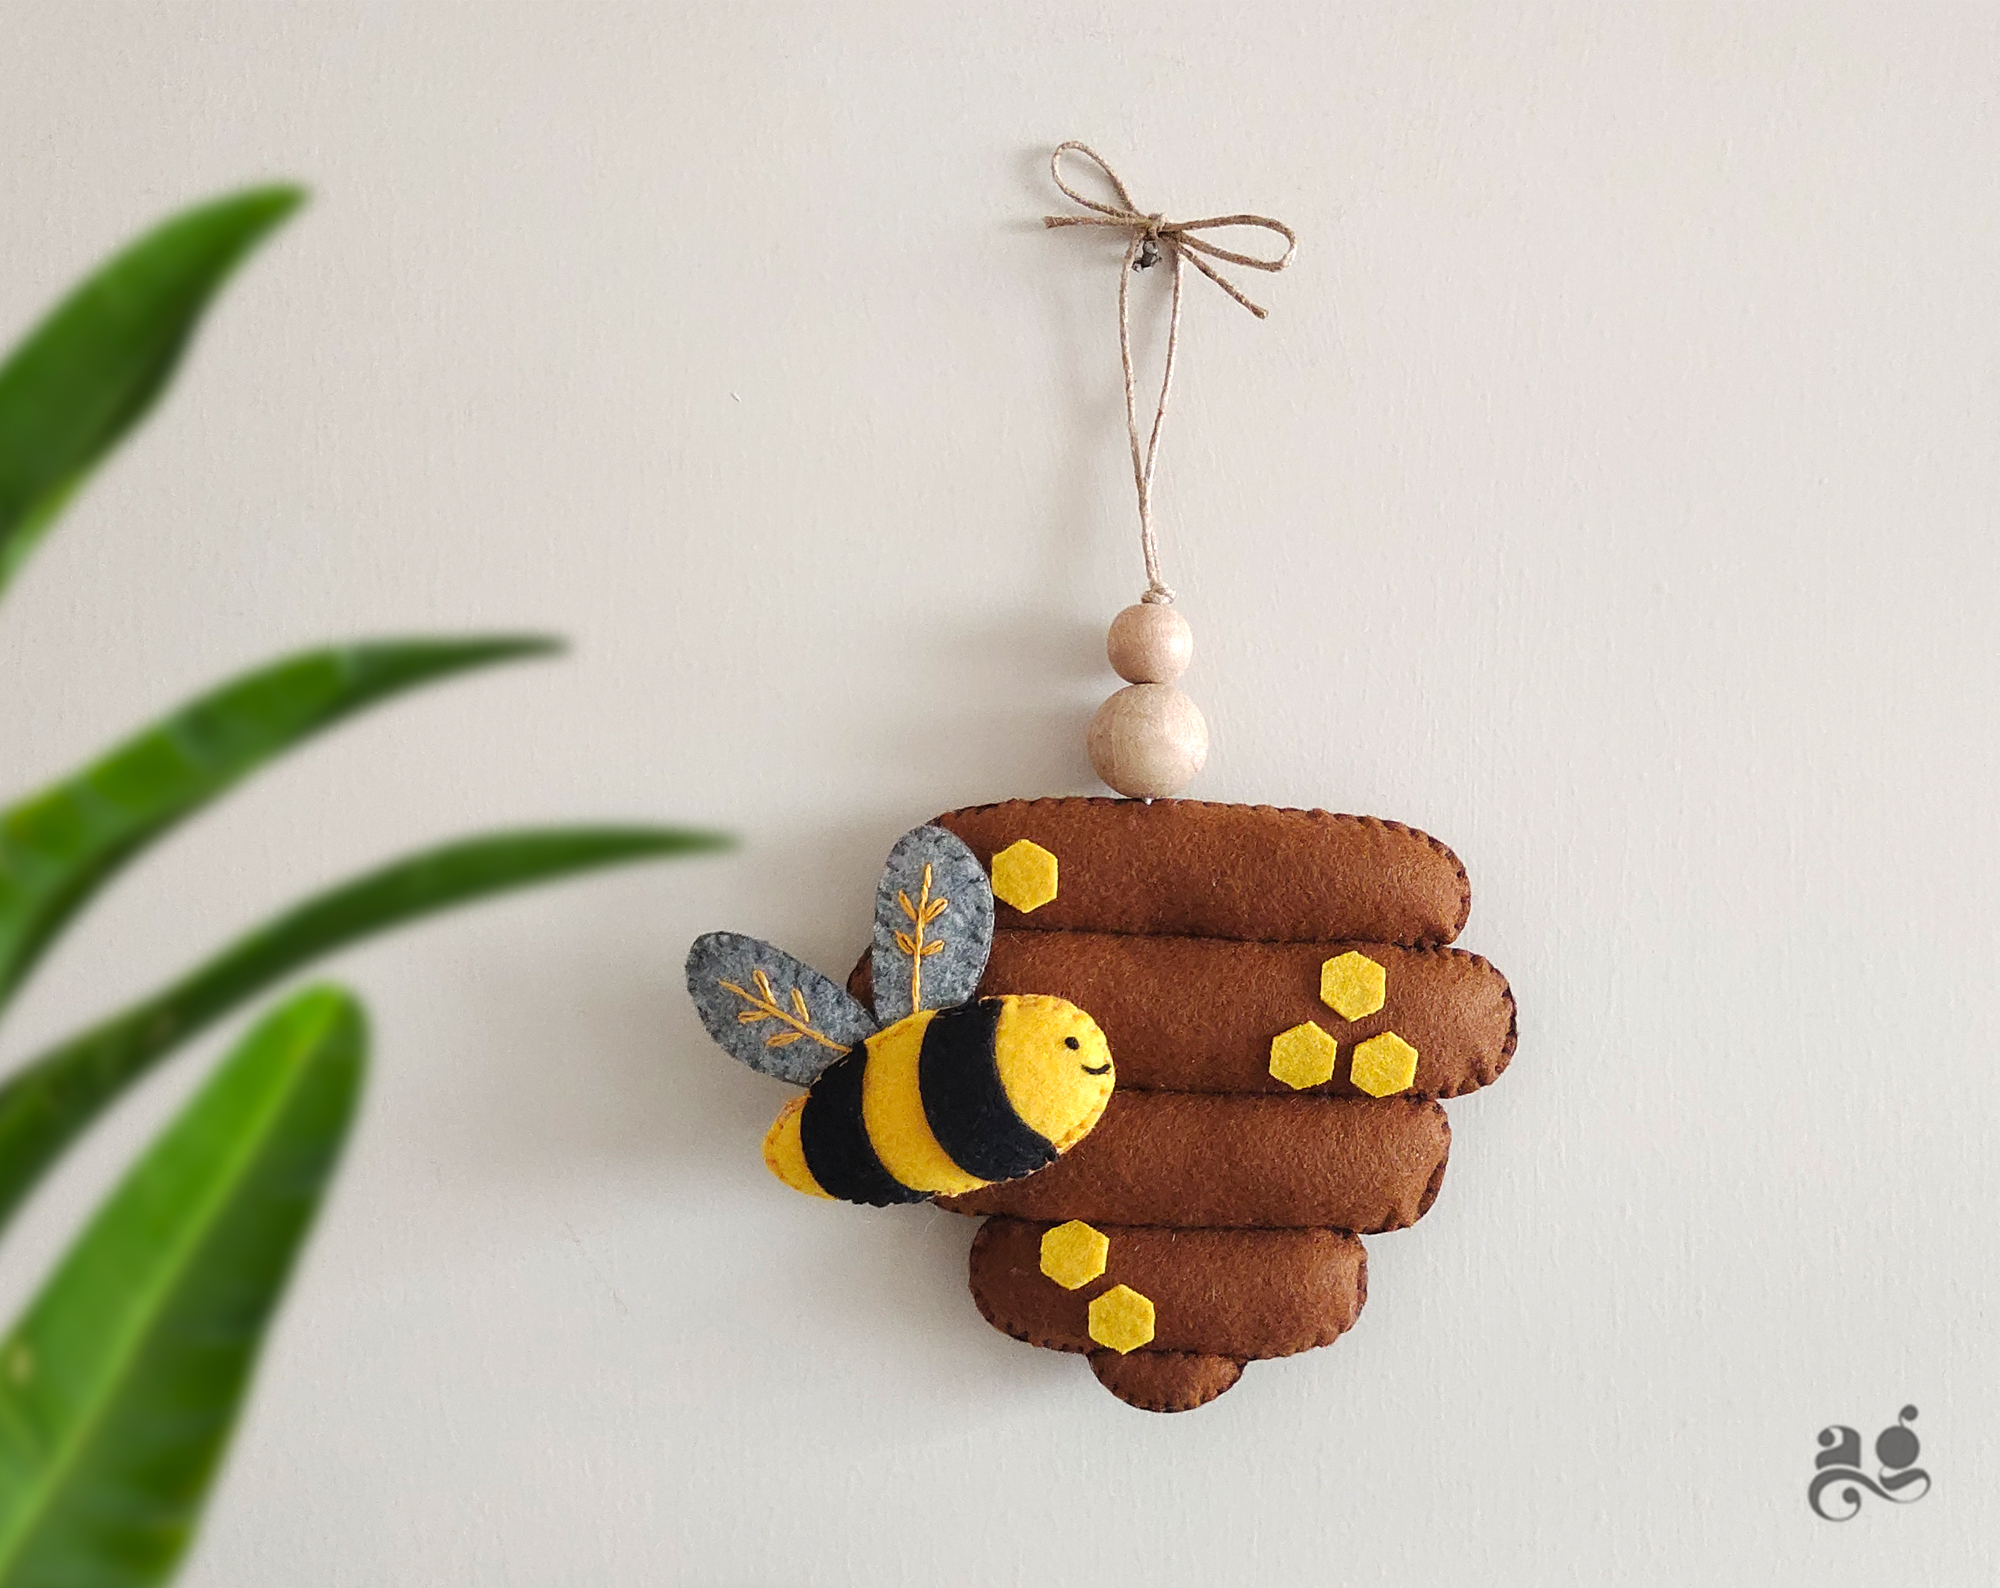 Beehive and Bumblebee Ornament